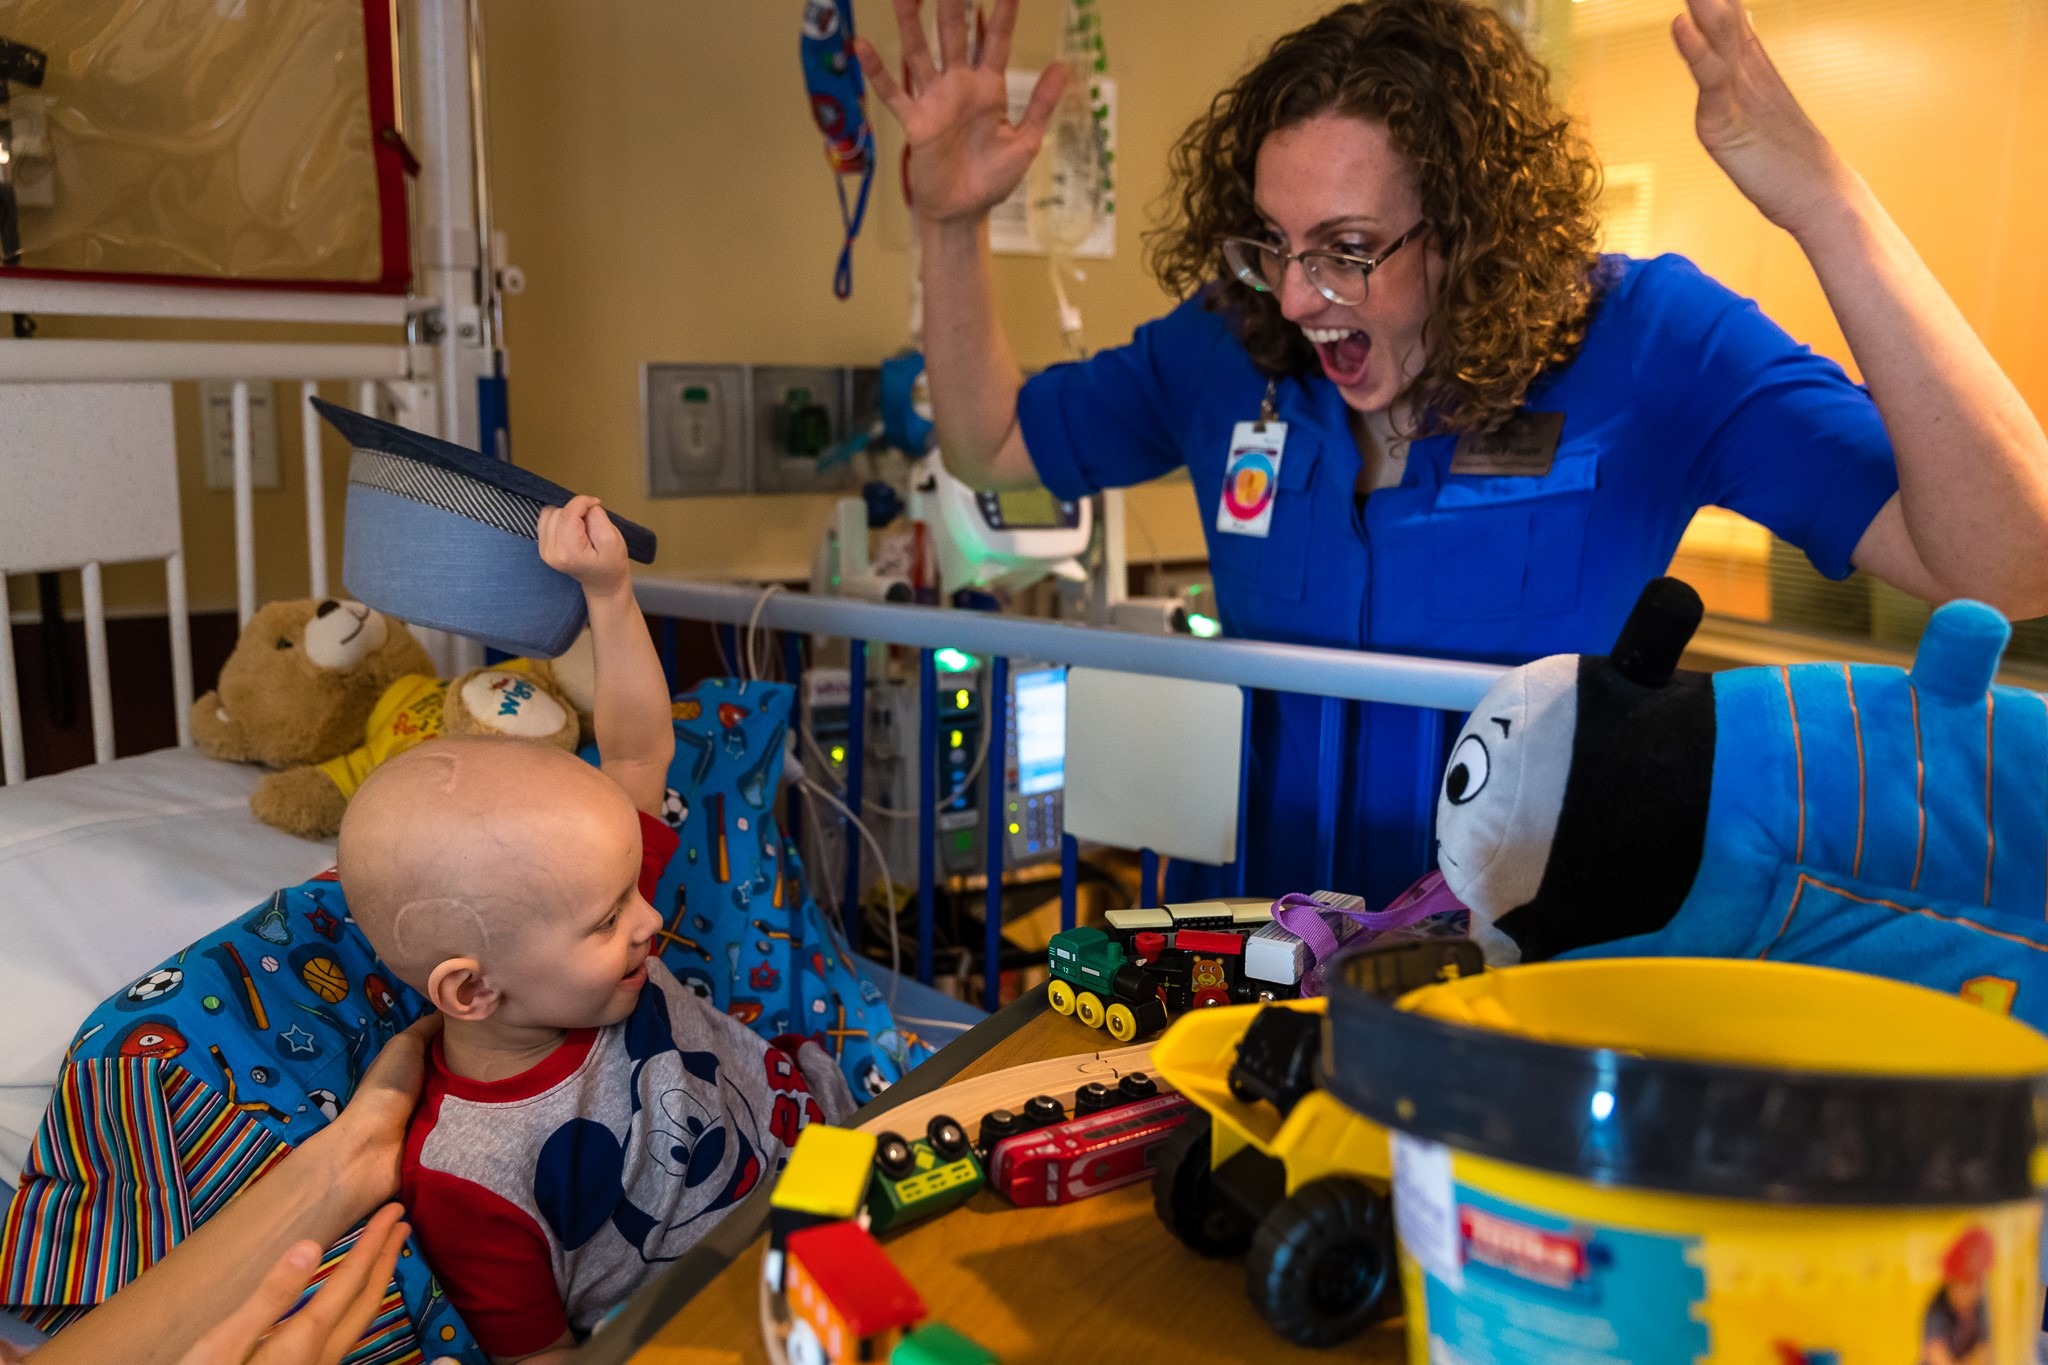 Integreative Touch organization: A healthcare worker is playing with an Autism pediatric patient   